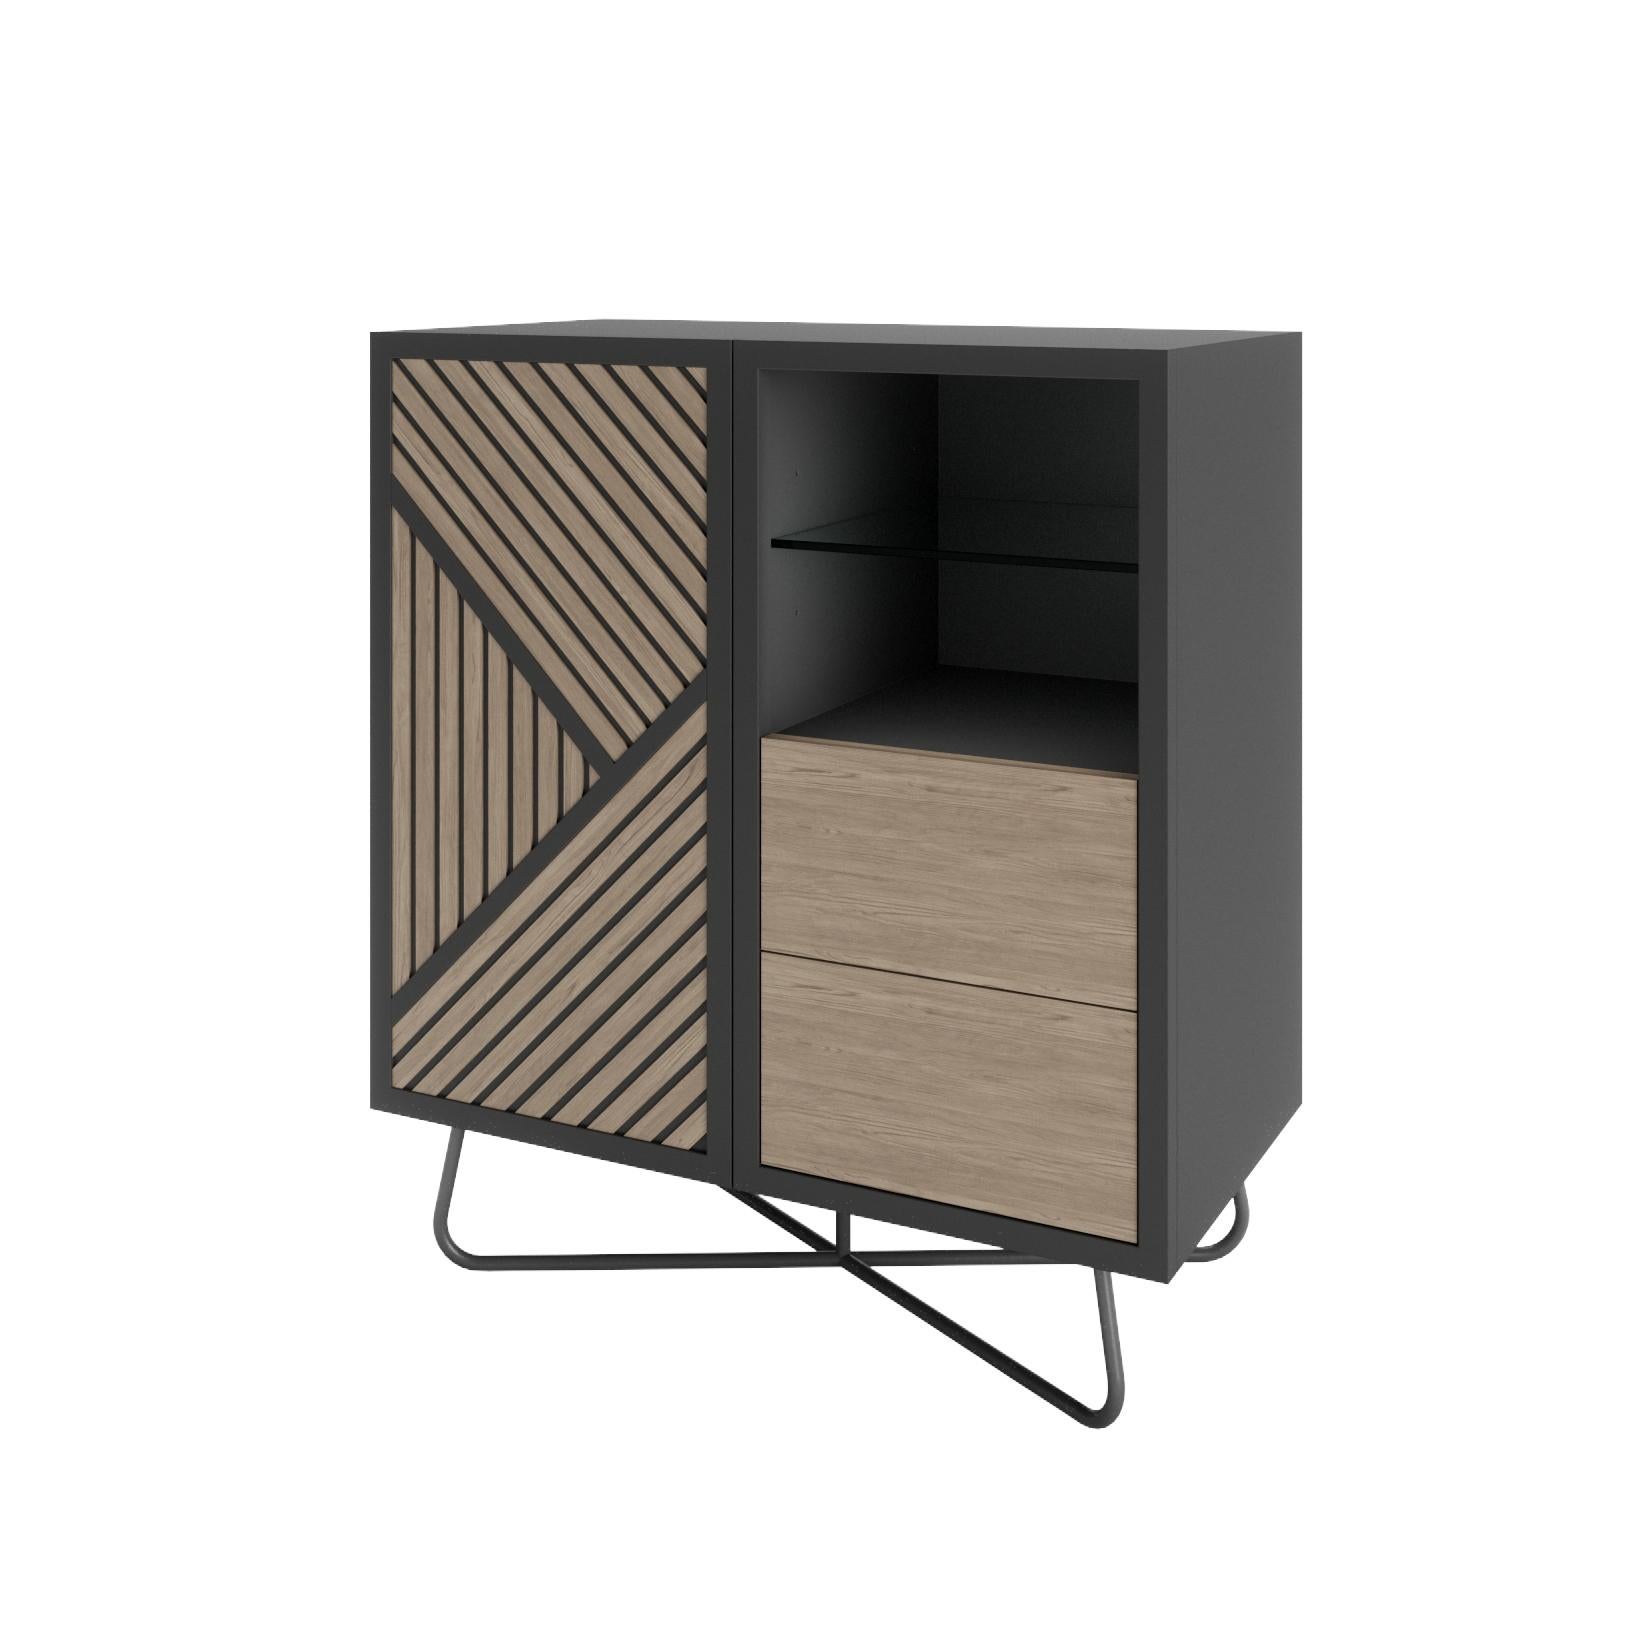 The combination of the black base of its pieces and oak veneer geometric patterns, give this collection a modern, elegant and timeless character.

Modern and widely customizable with different colors and finishes. The perfect collection to fit any